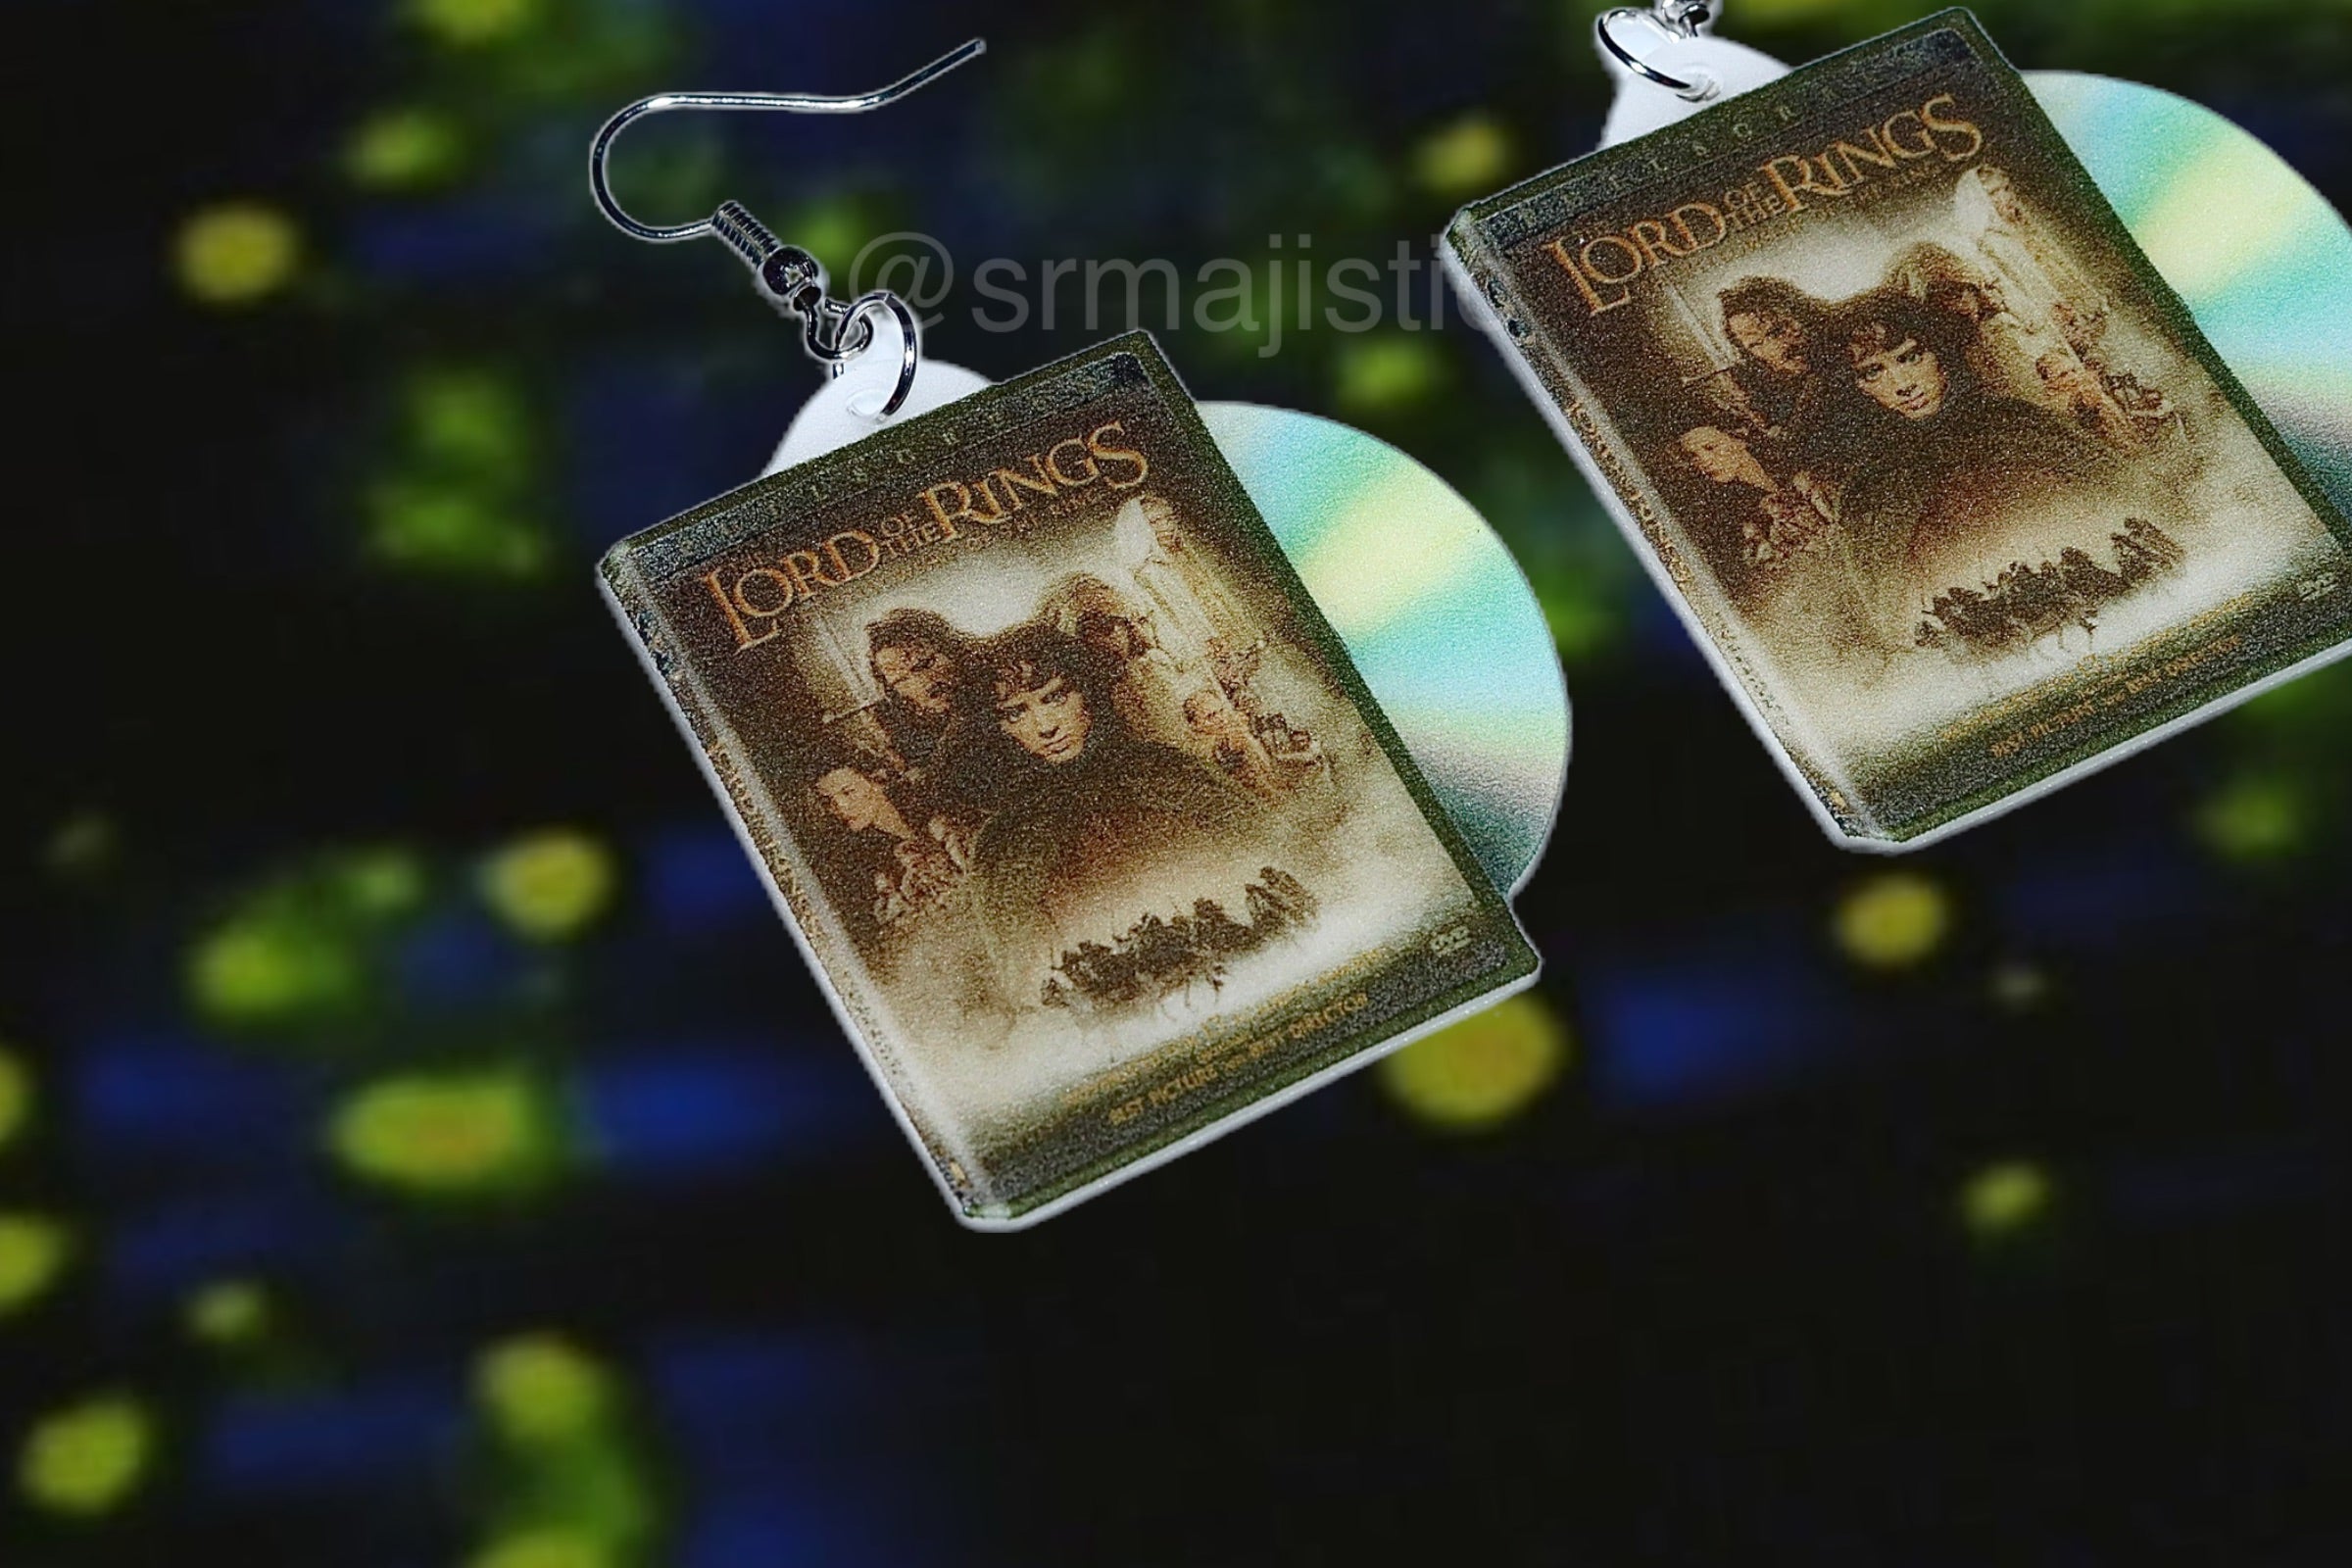 Lord of the Rings the Fellowship of the Rings (2001) DVD 2D detailed Handmade Earrings!